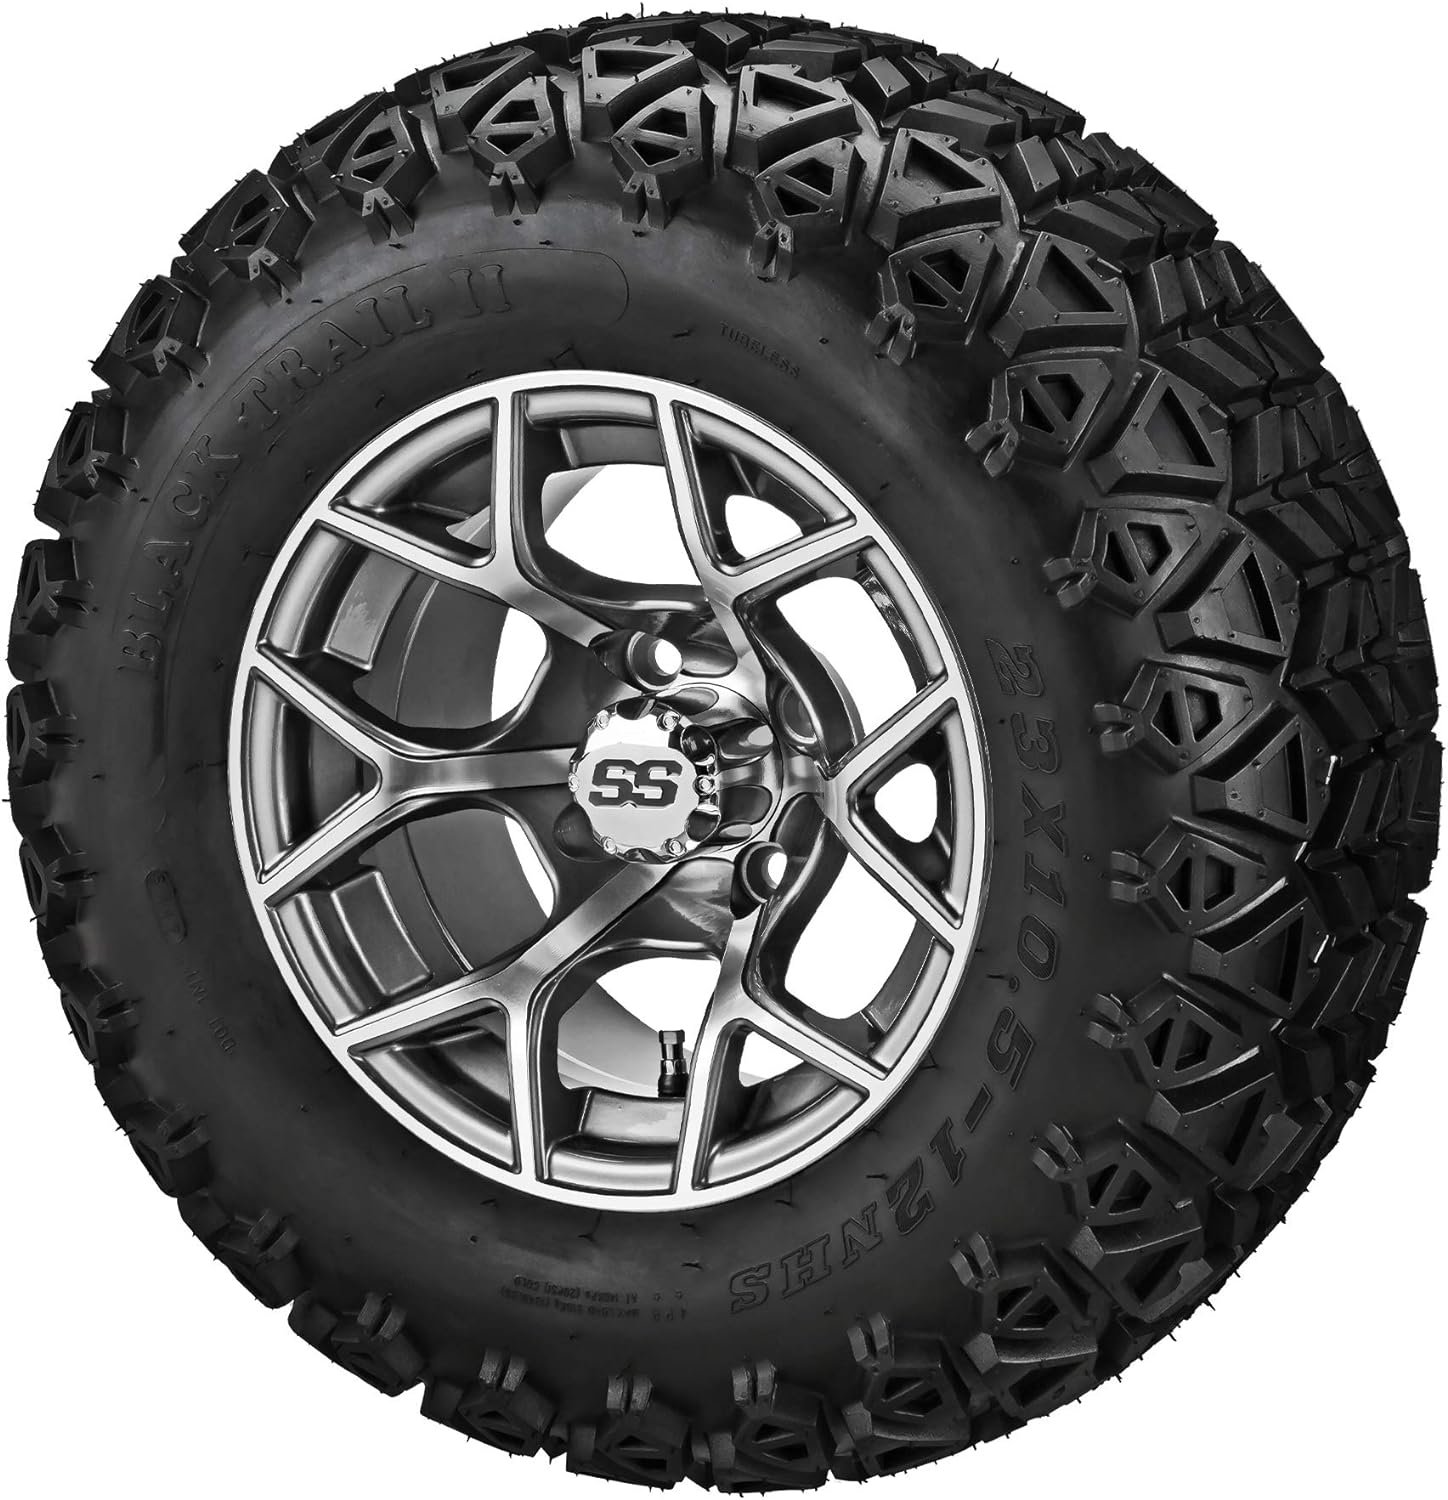 RM Cart - 12 Ninja Gun Metal Gray/Machined on 23x10.50-12 Black Trail II Tires (Set of 4), Fits Yamaha carts, Golf Cart Tires and Wheels Combo, Can be Used on Lawn Mowers and ATVs